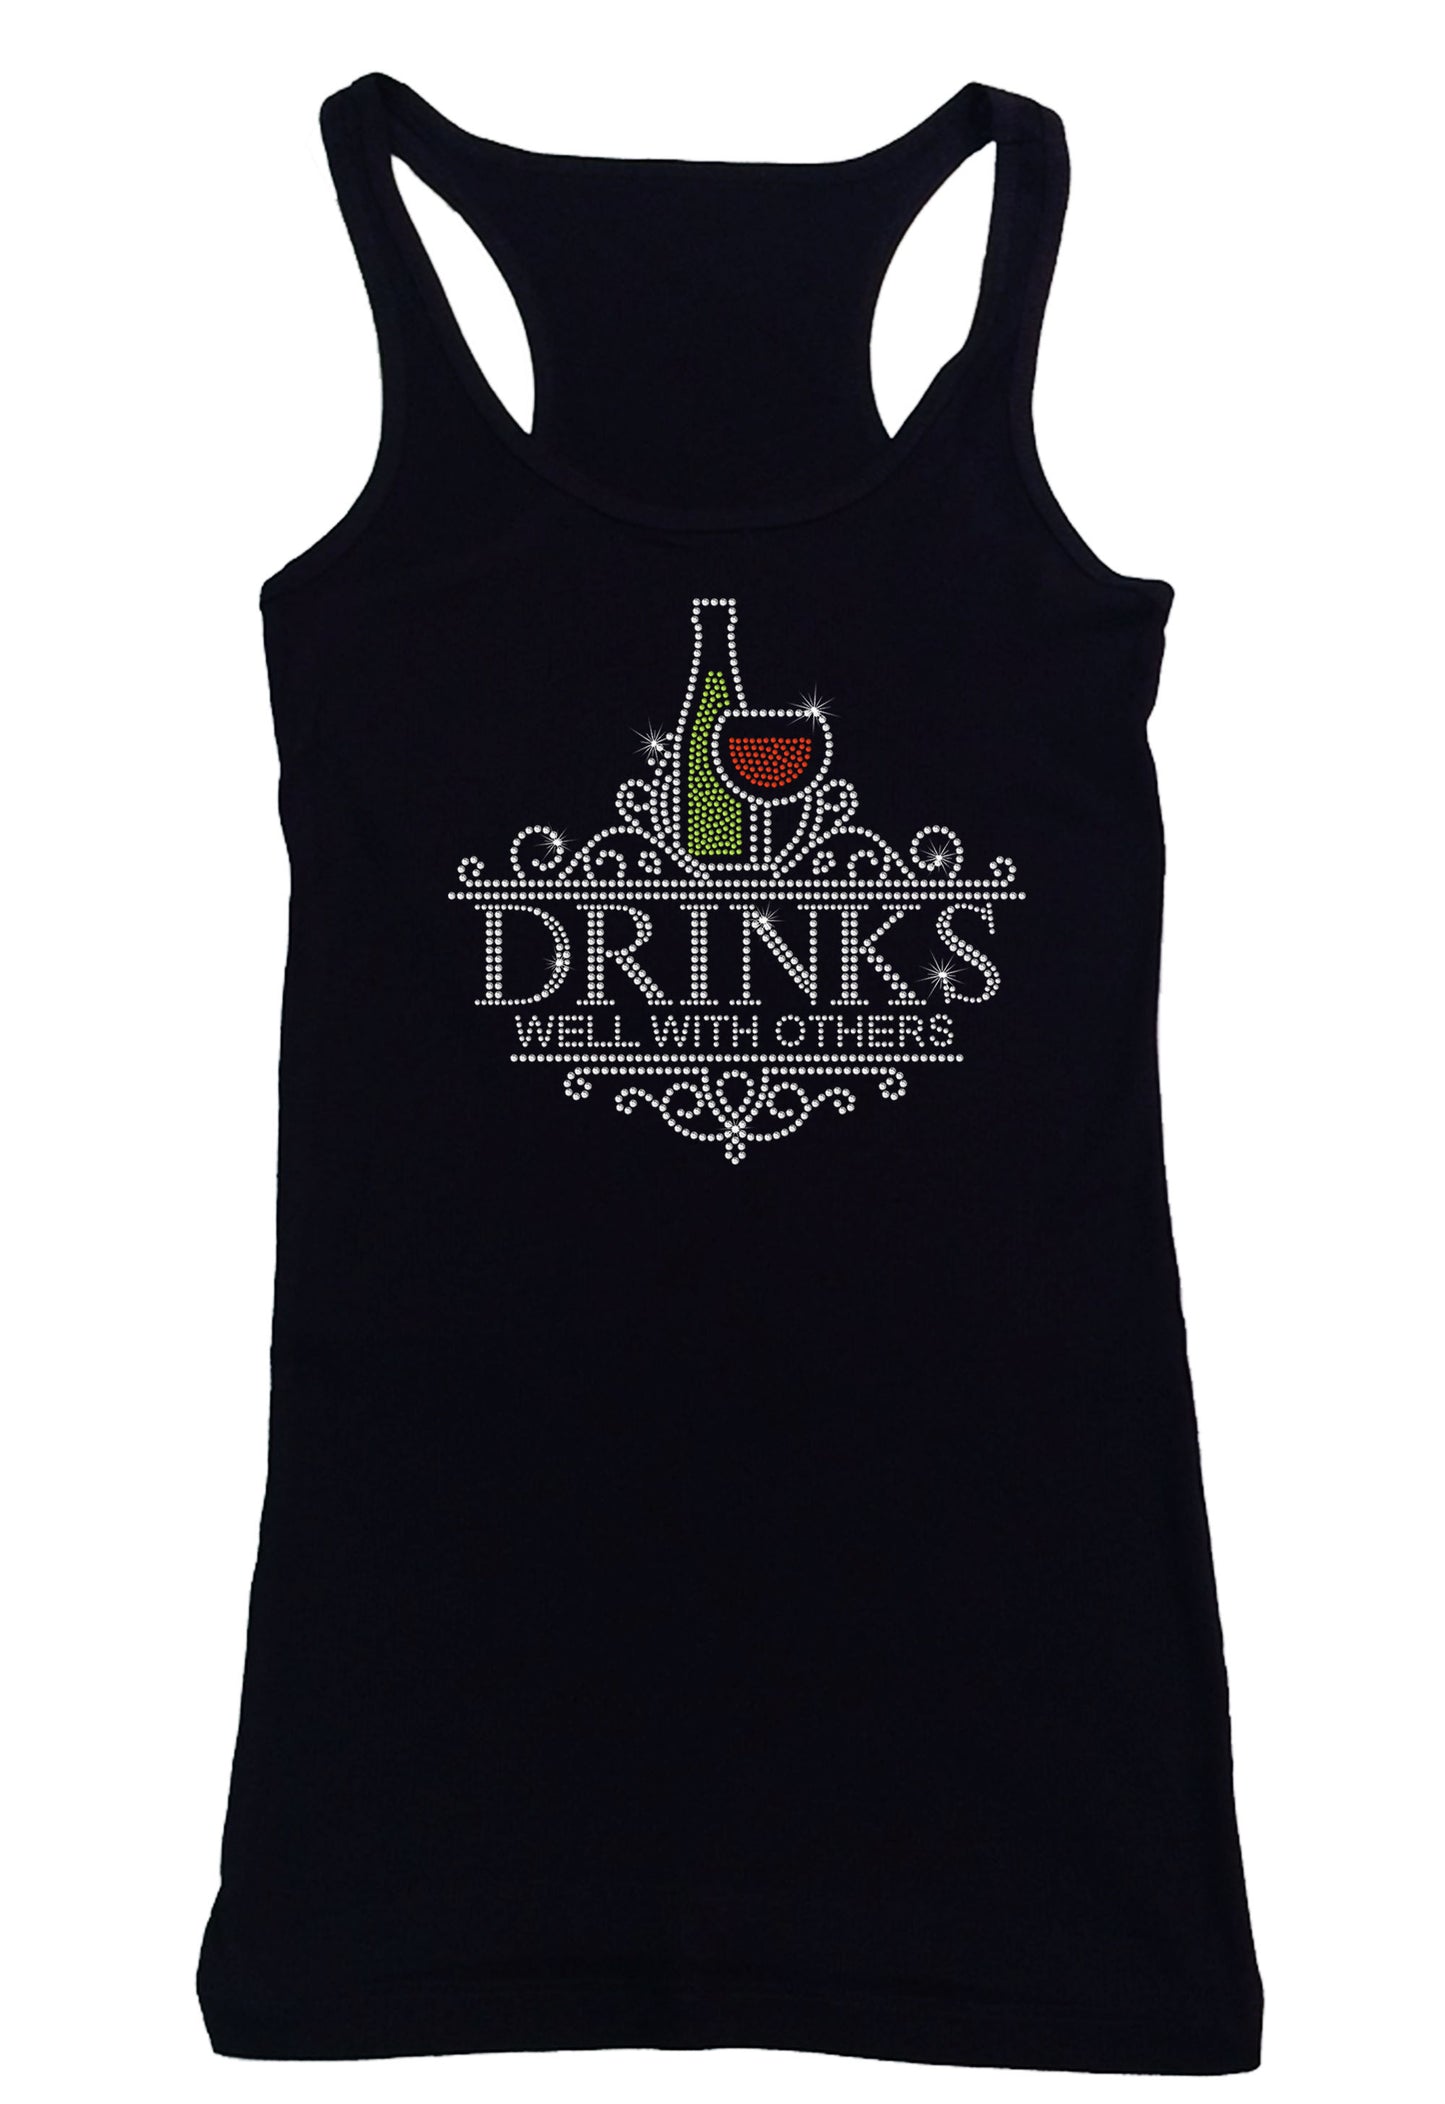 Women's Rhinestone Fitted Tight Snug Shirt Drinks Well with Others - Wine Glass and Wine Bottle